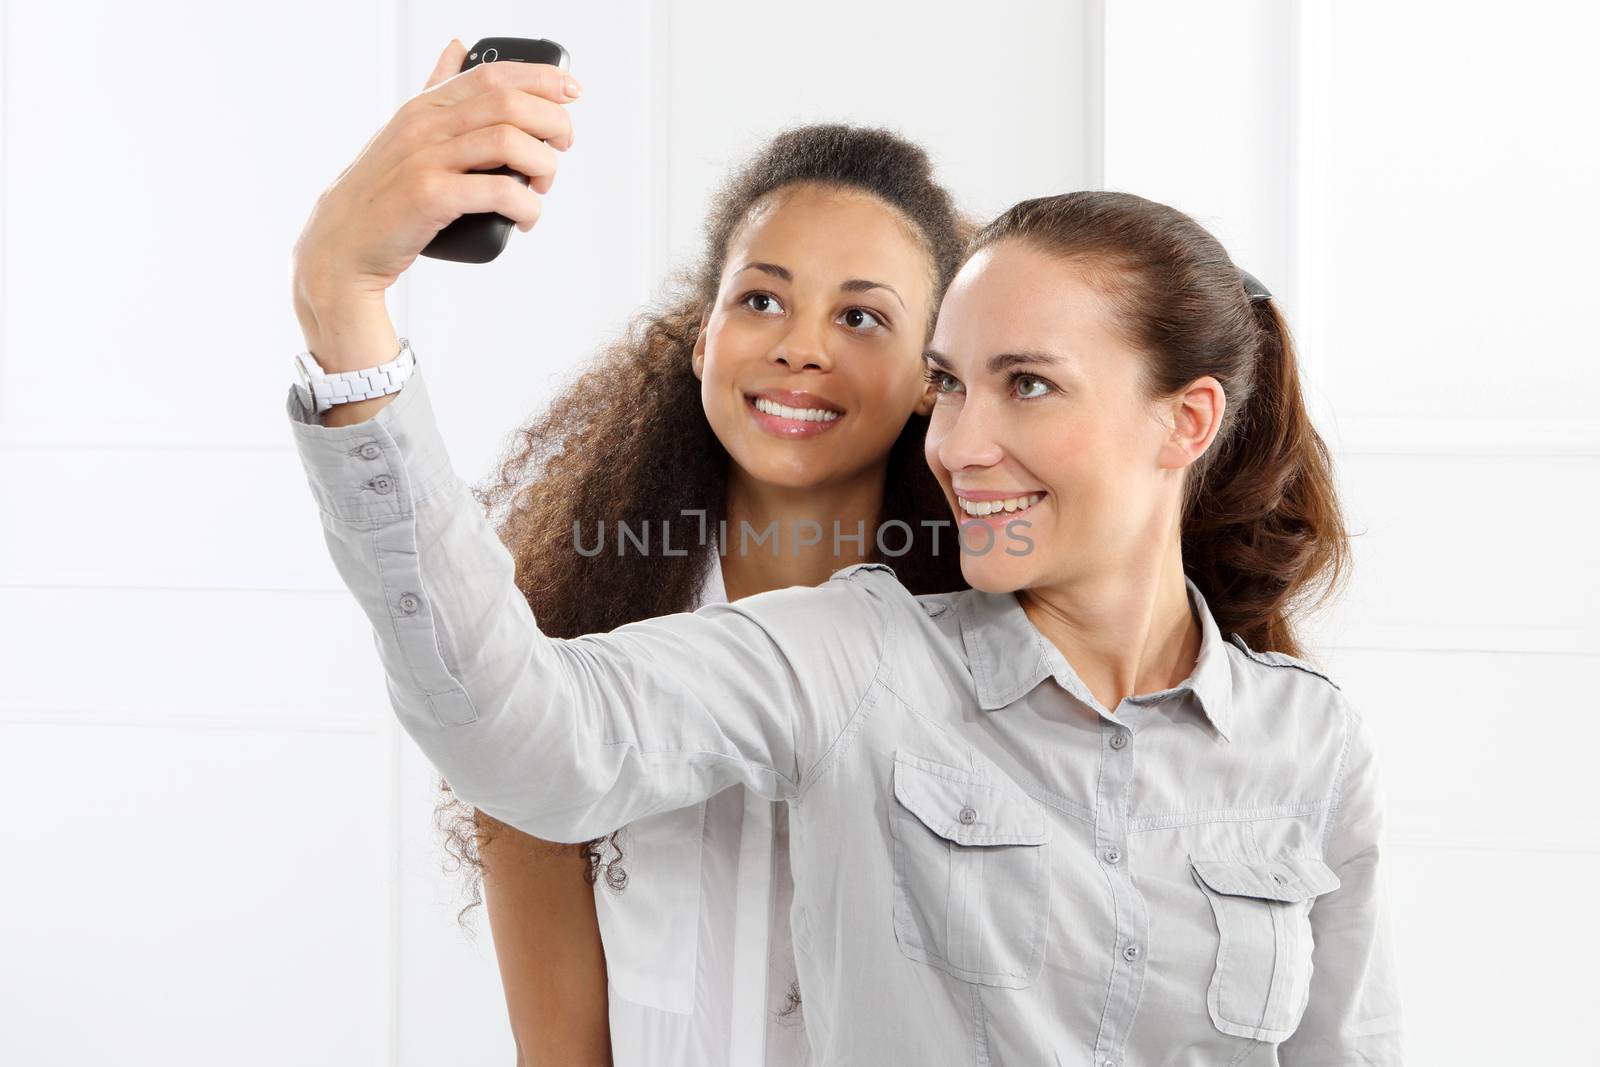 Two women take pictures with your phone